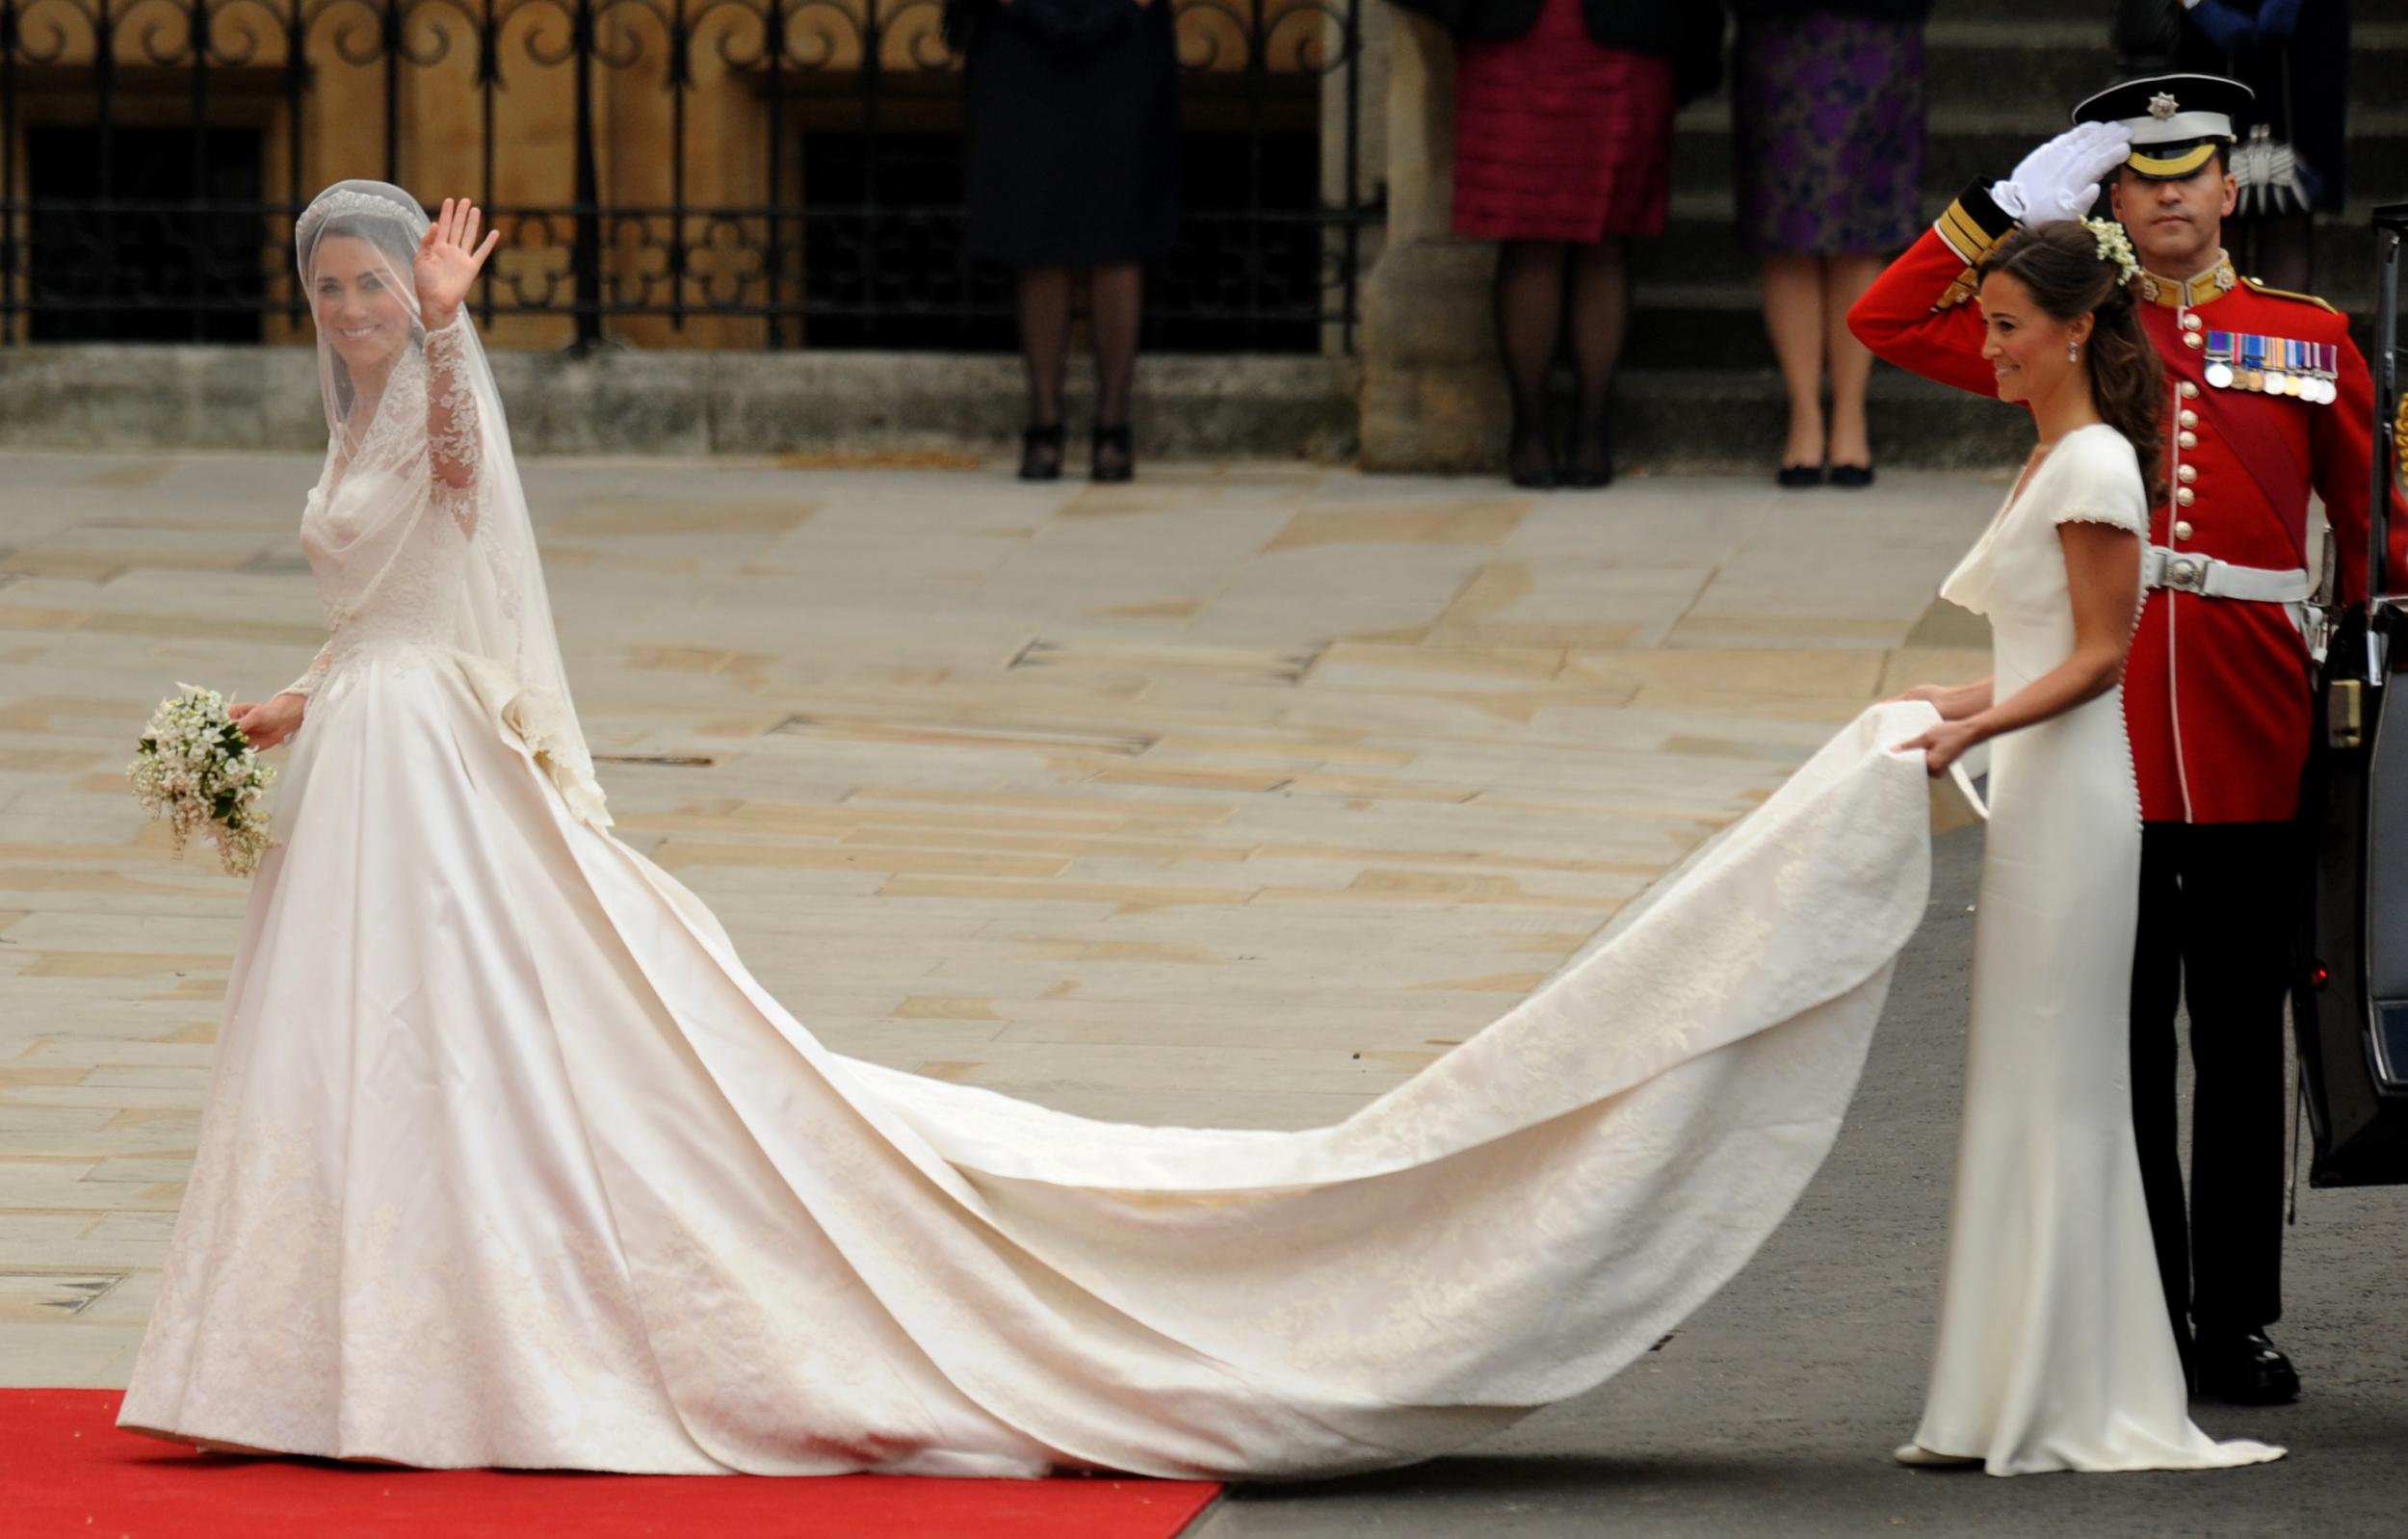 Pippa Middleton held the wedding dress of her sister as they both entered Westminster Abbey